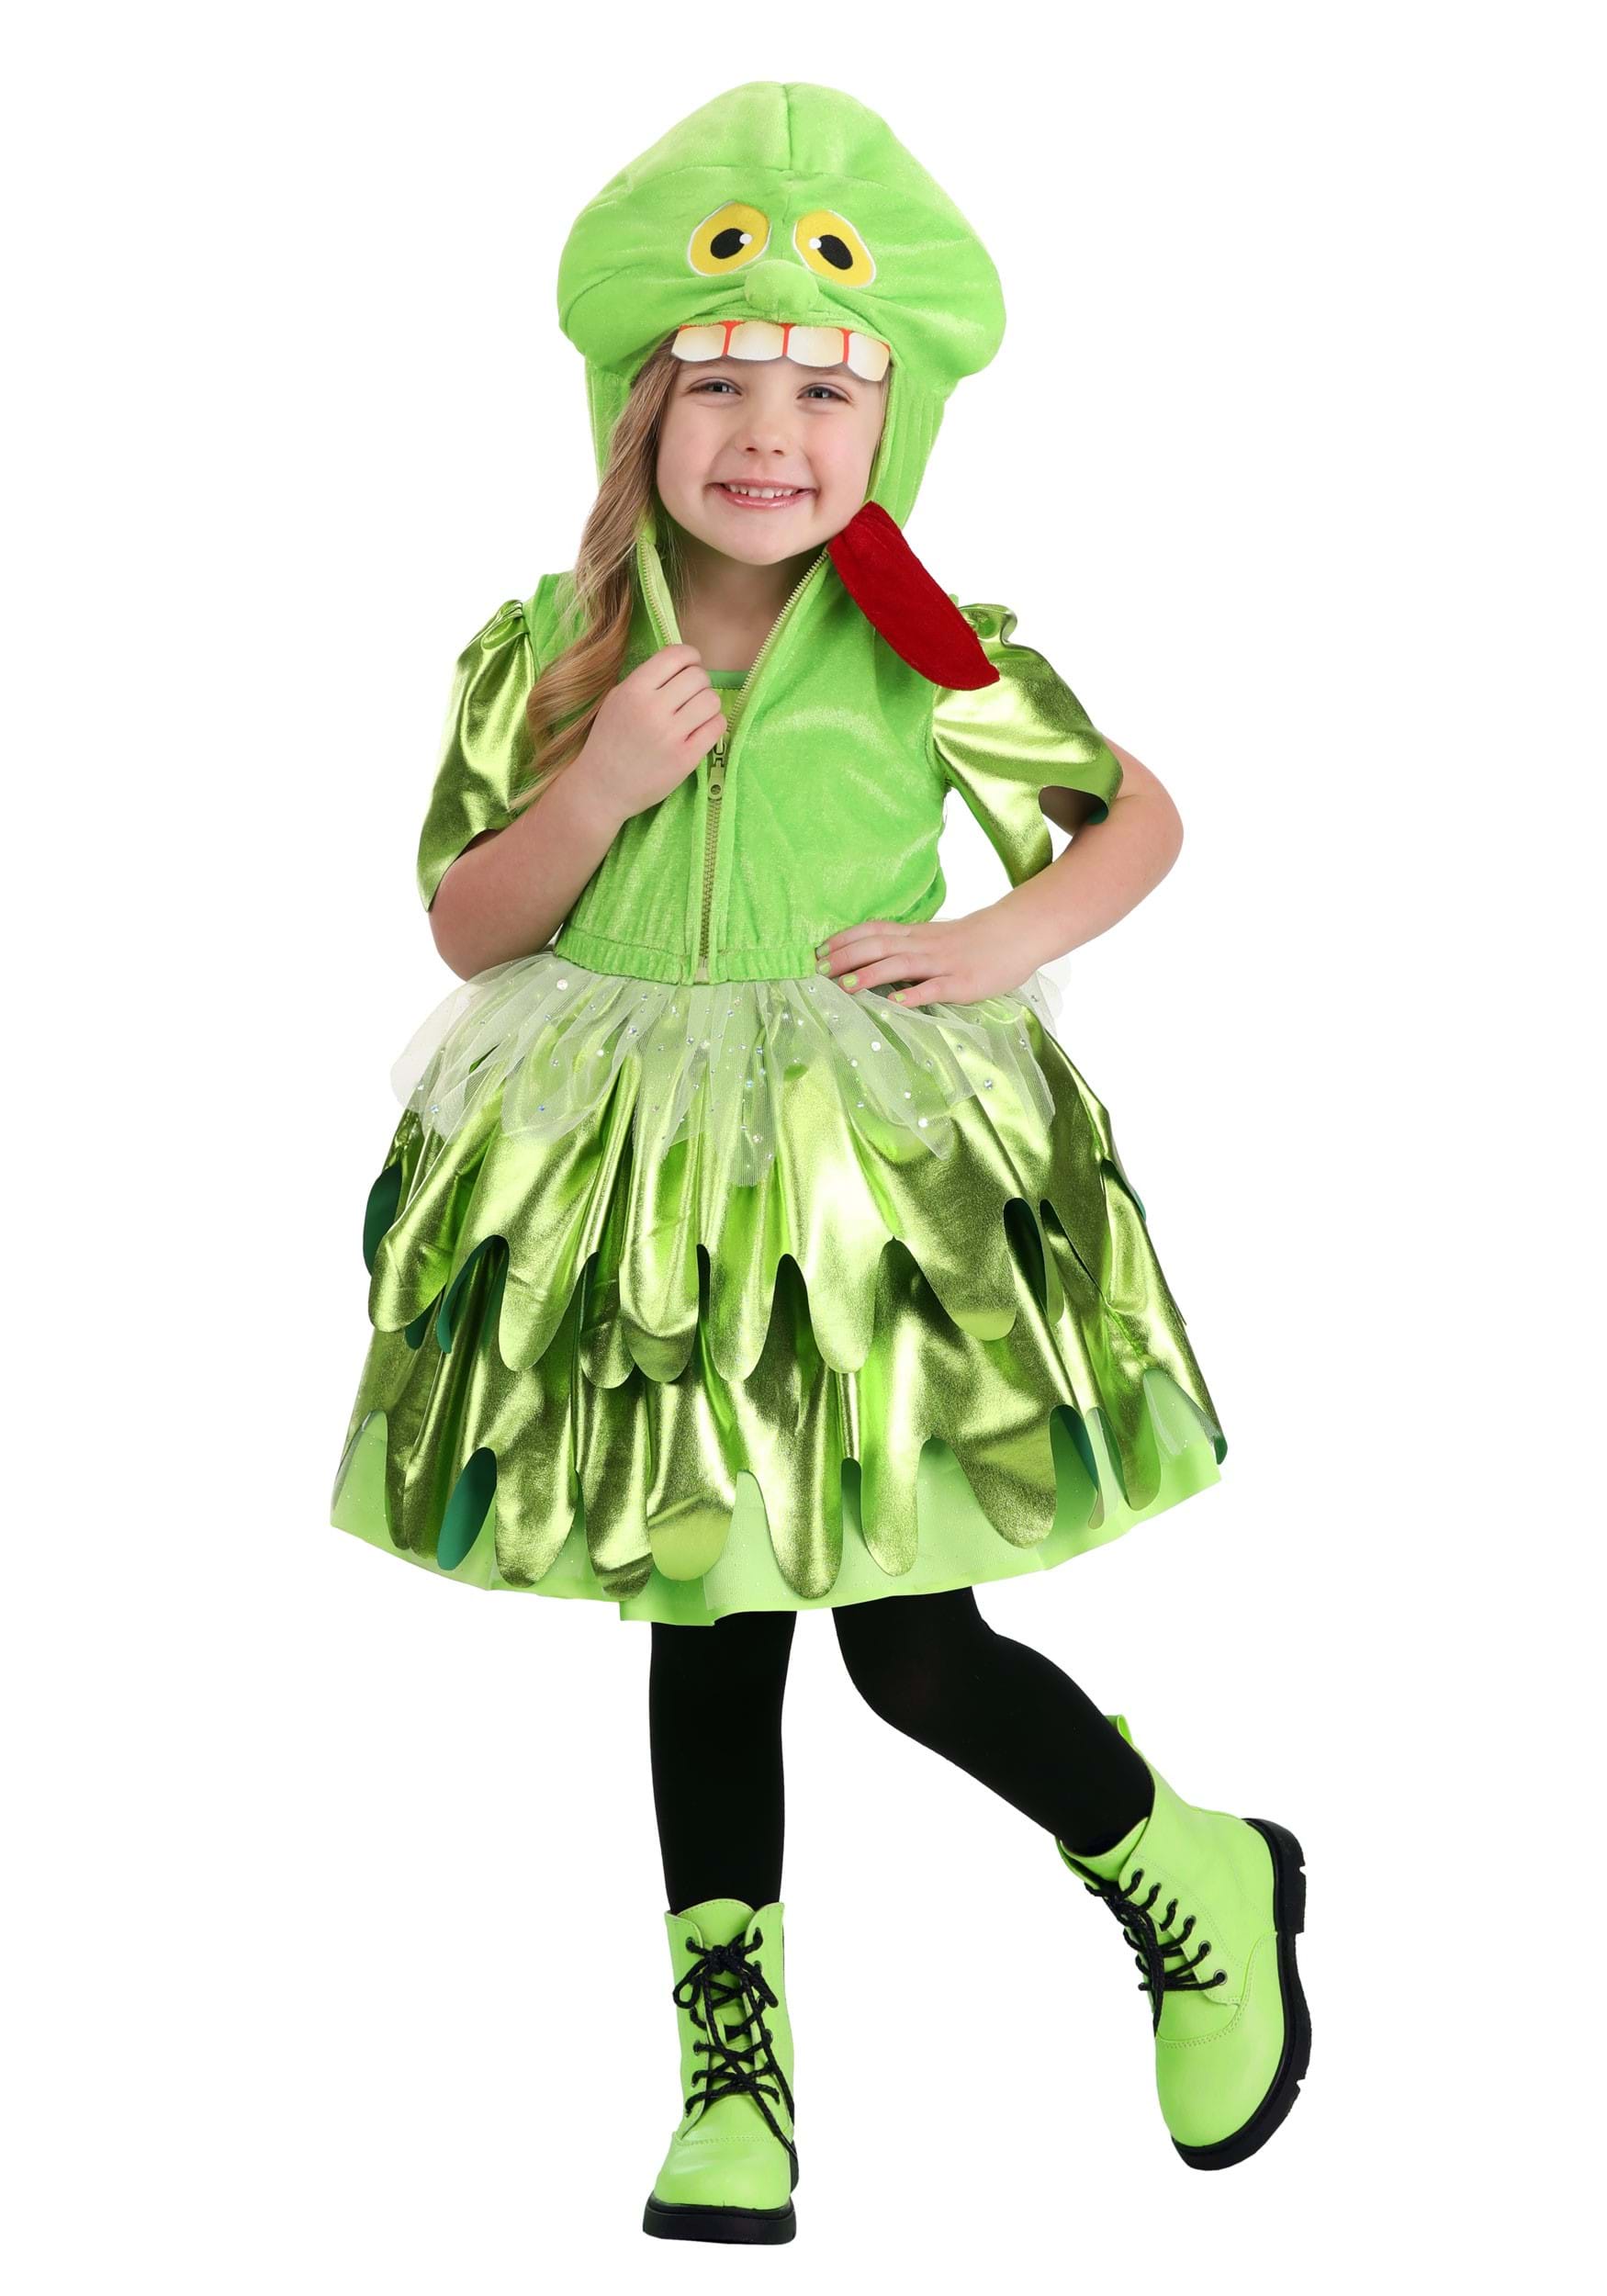 Photos - Fancy Dress Ghostbusters FUN Costumes  Toddler Girl's Slimer Costume Green/Red/ 